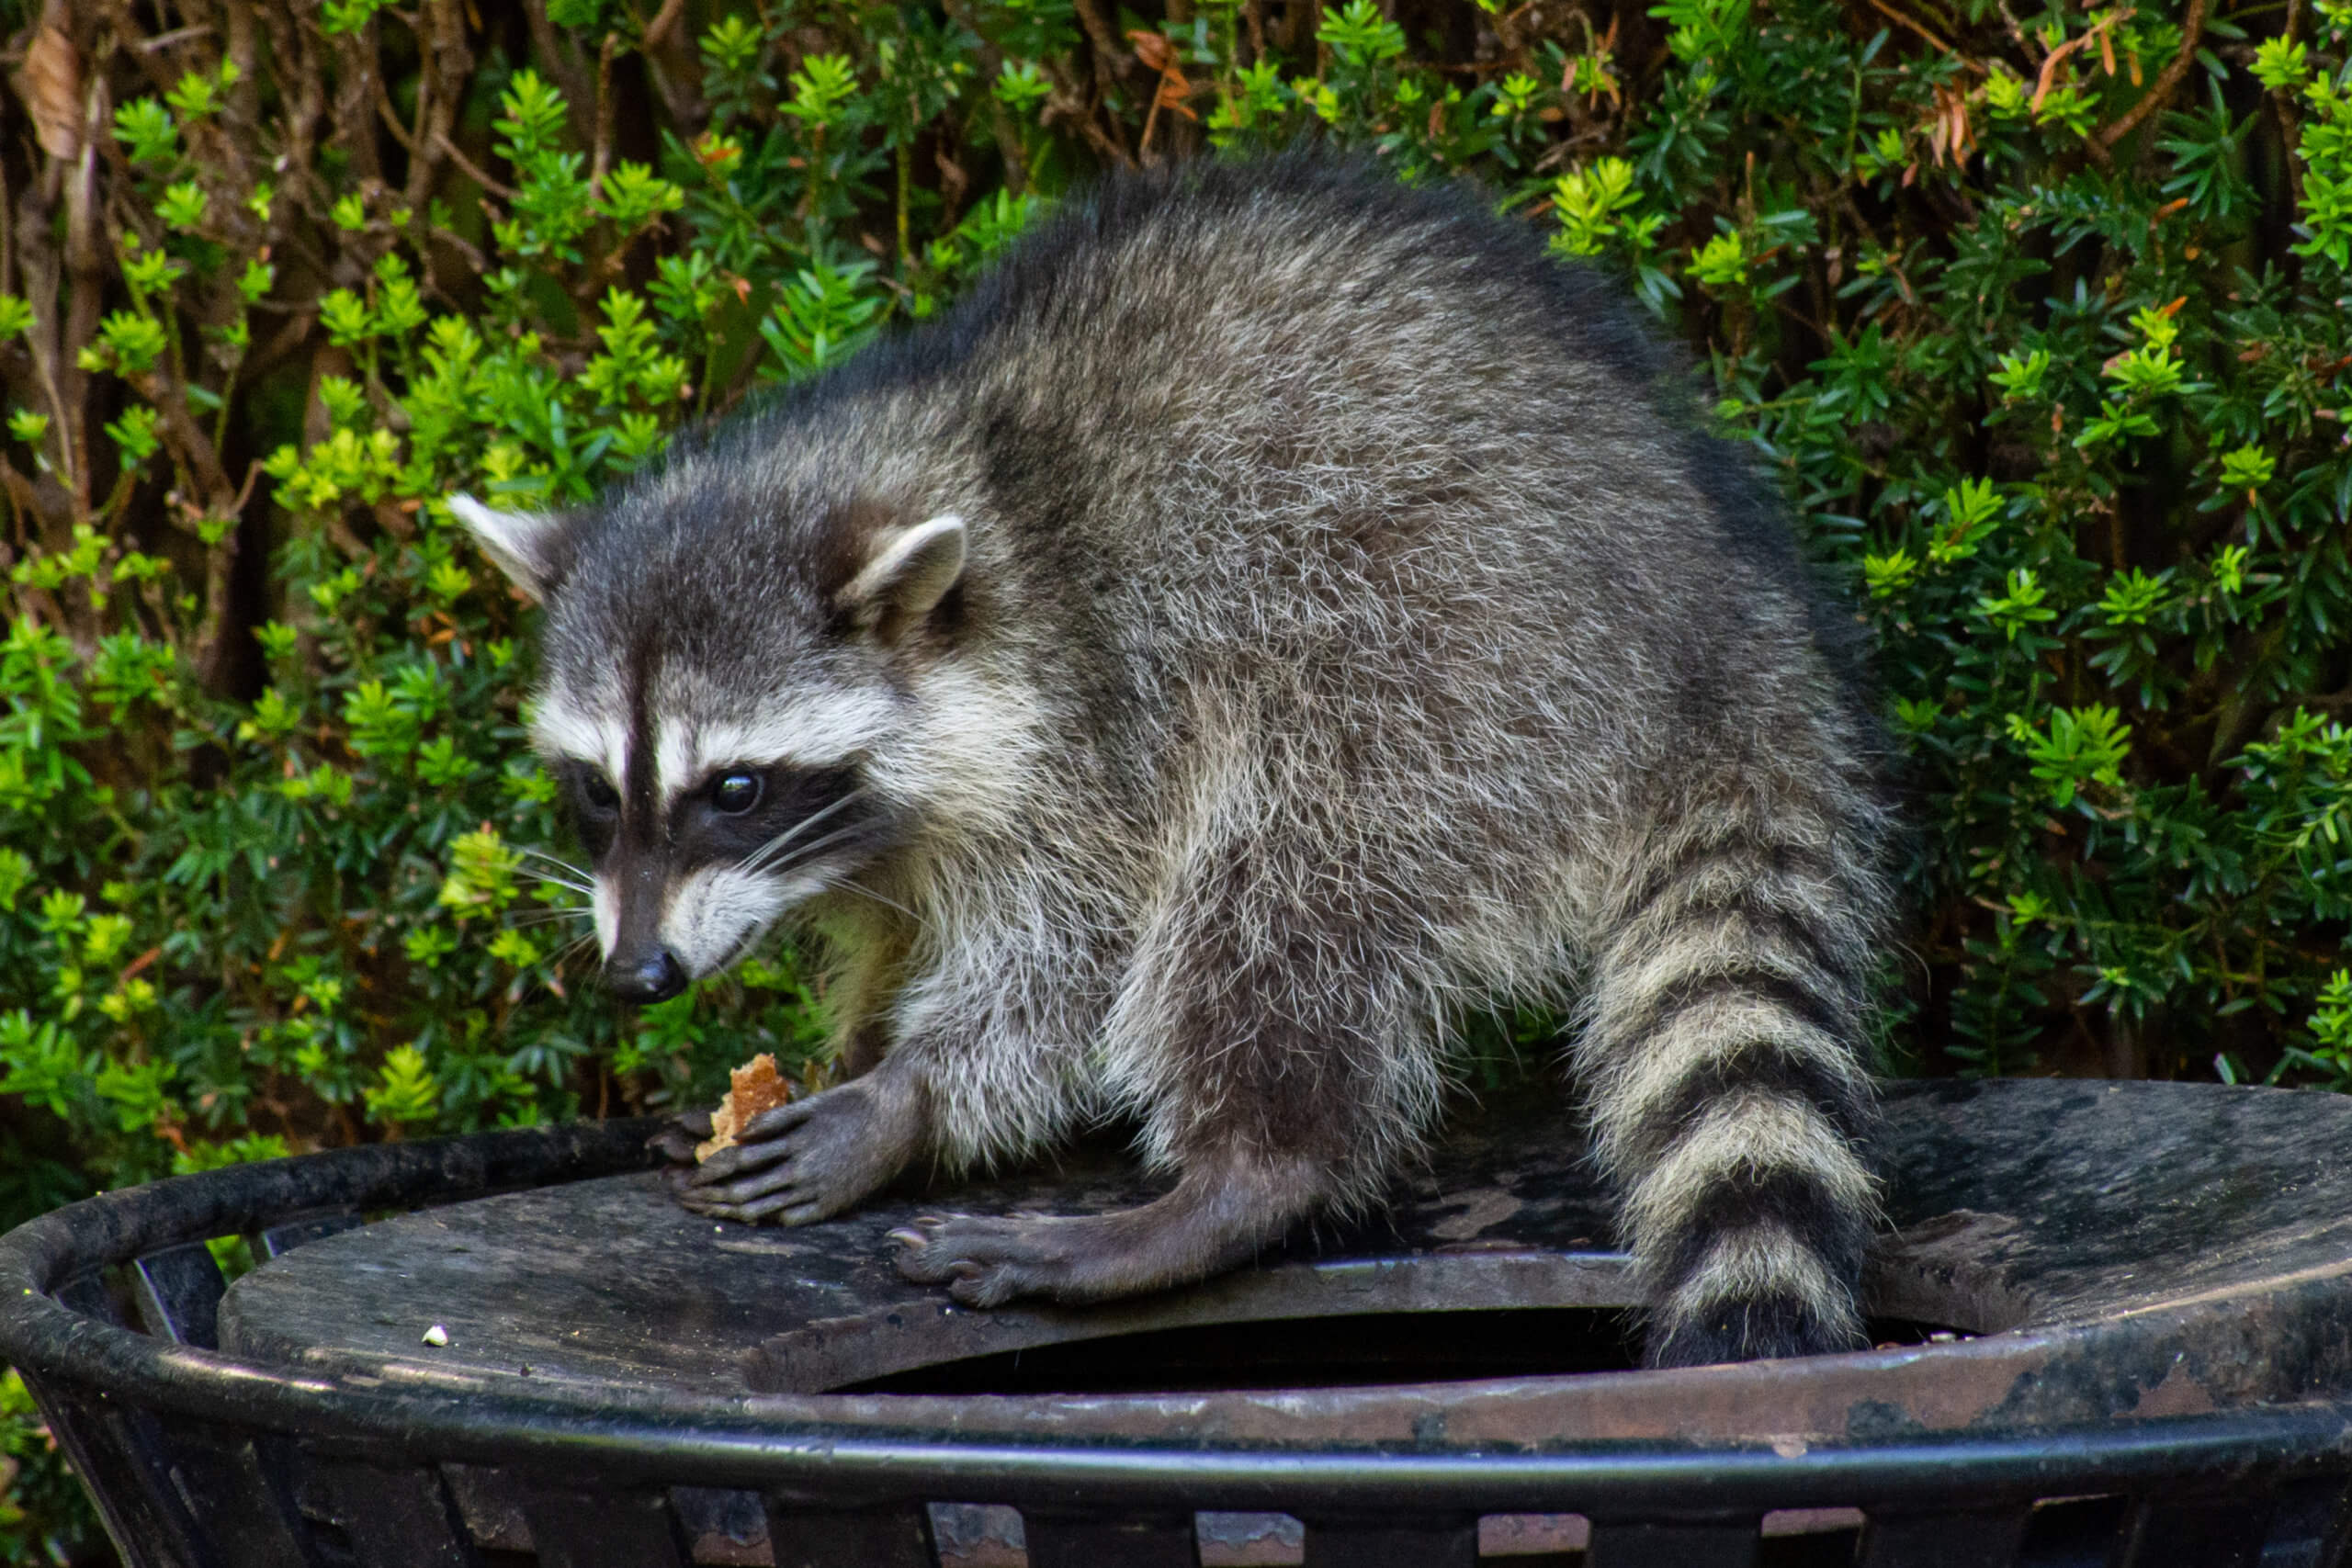 Health Dept to vaccinate raccoons against rabies across the city | amNewYork